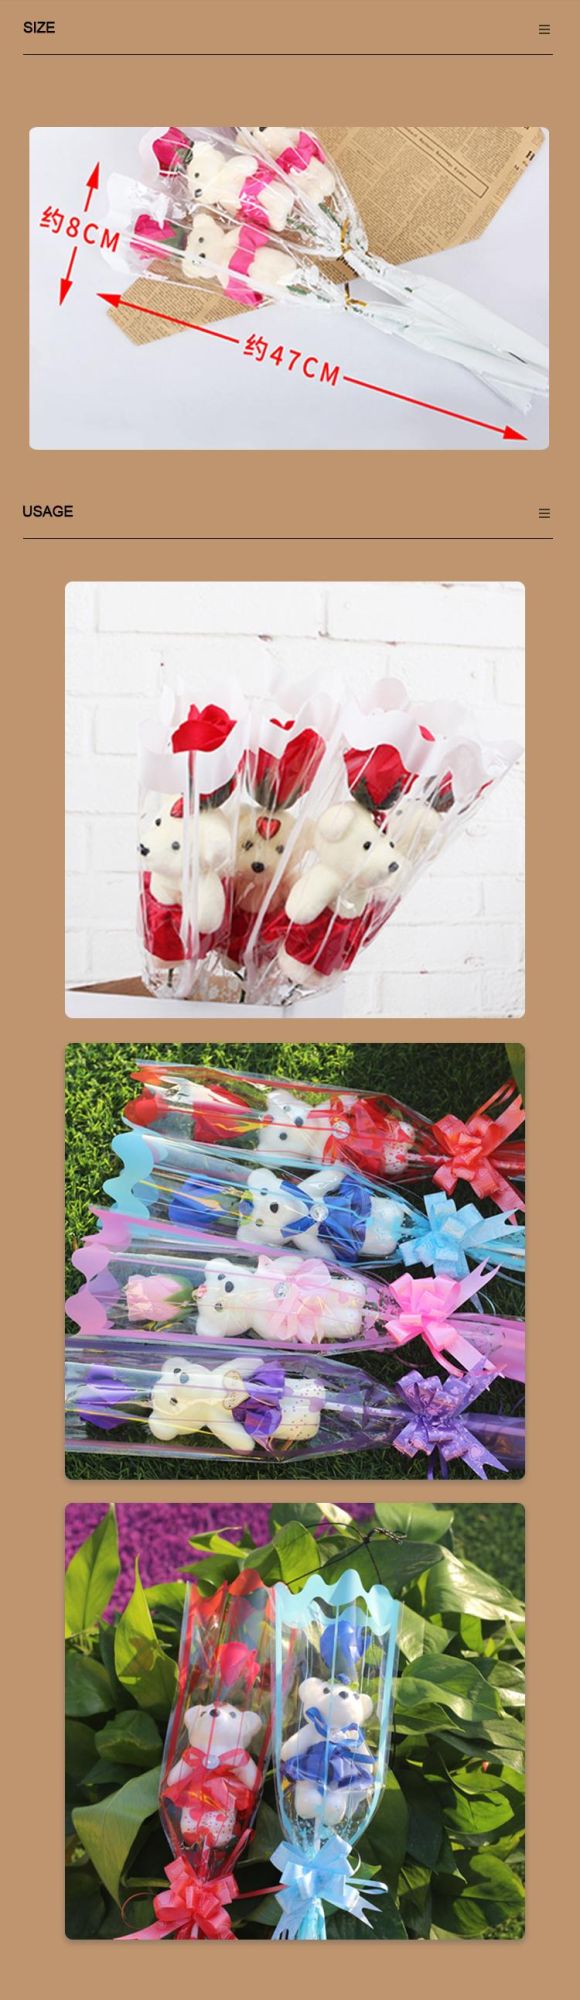 Factory Soap Flower Rose Teddy Bear for Christmas, Valentine′s Day, Mother′s Day Gifts